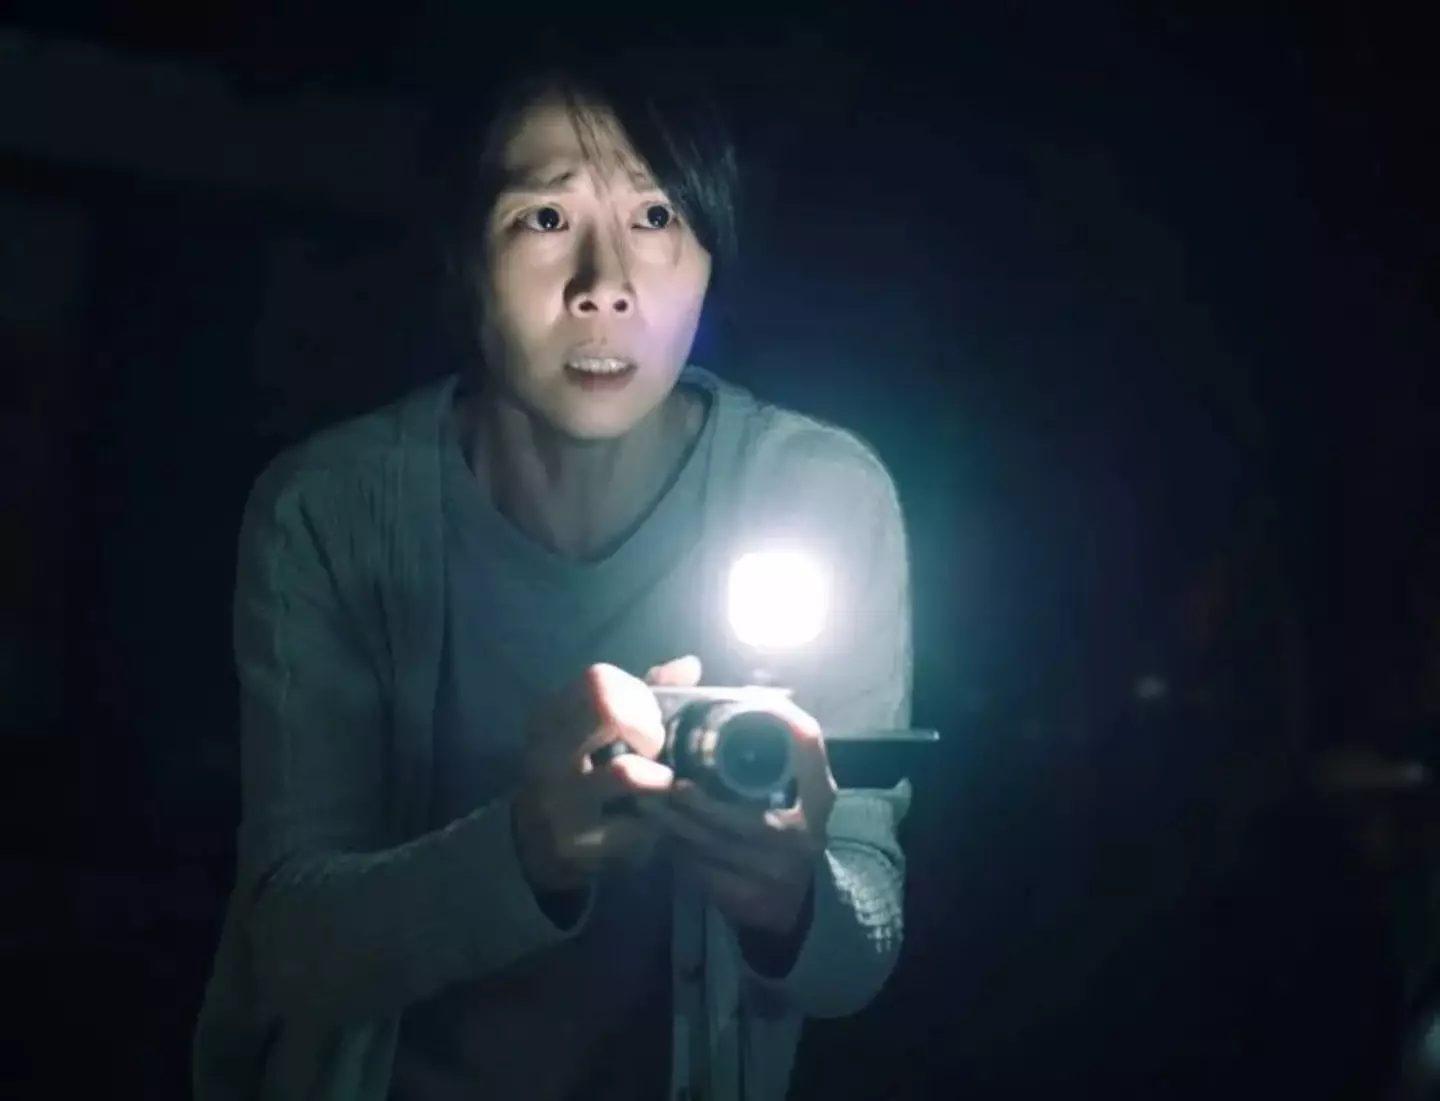 The Taiwanese horror landed on the streaming service earlier this month.